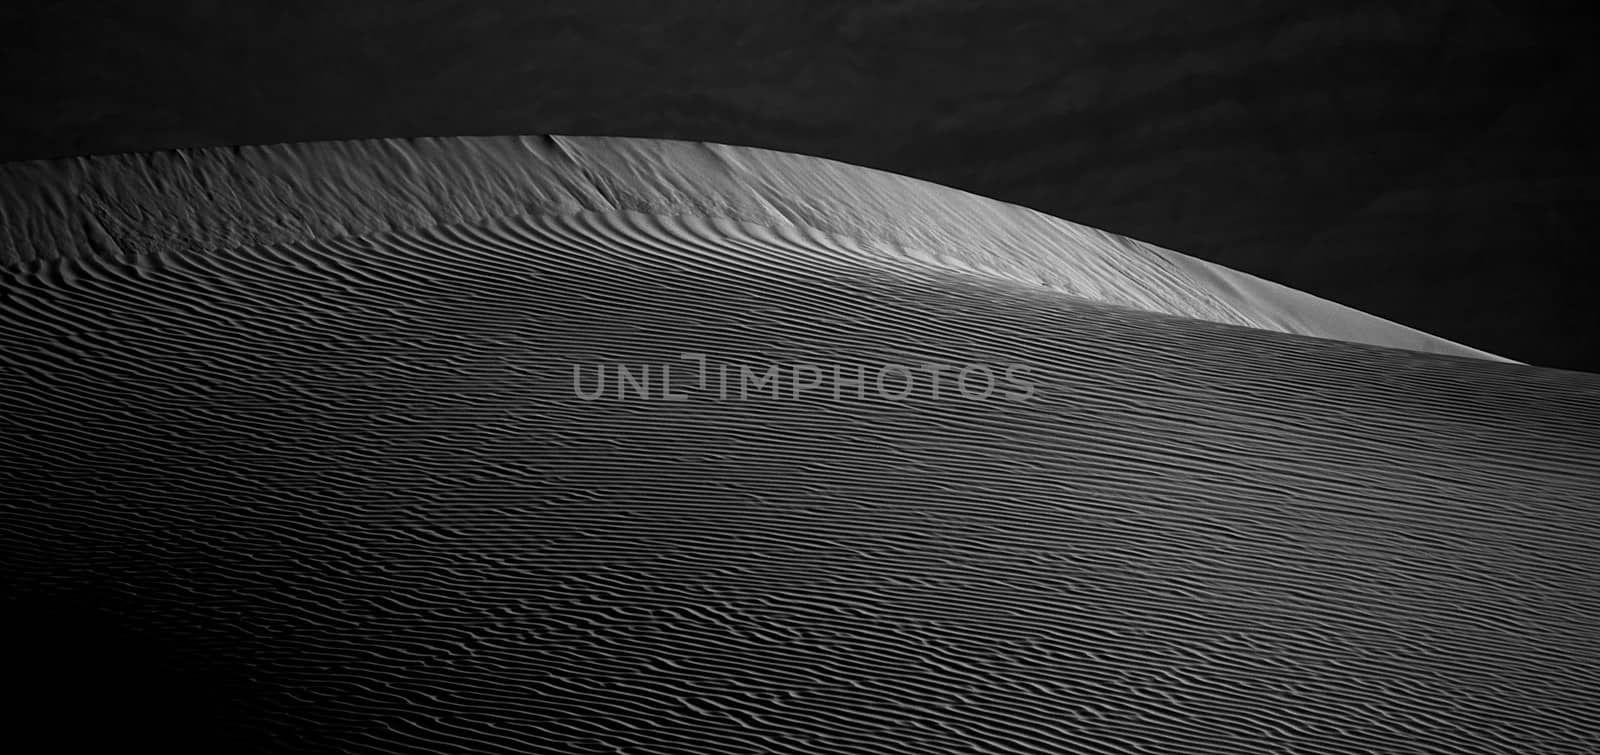 Sand Dune Formations in Death Valley National Park, California